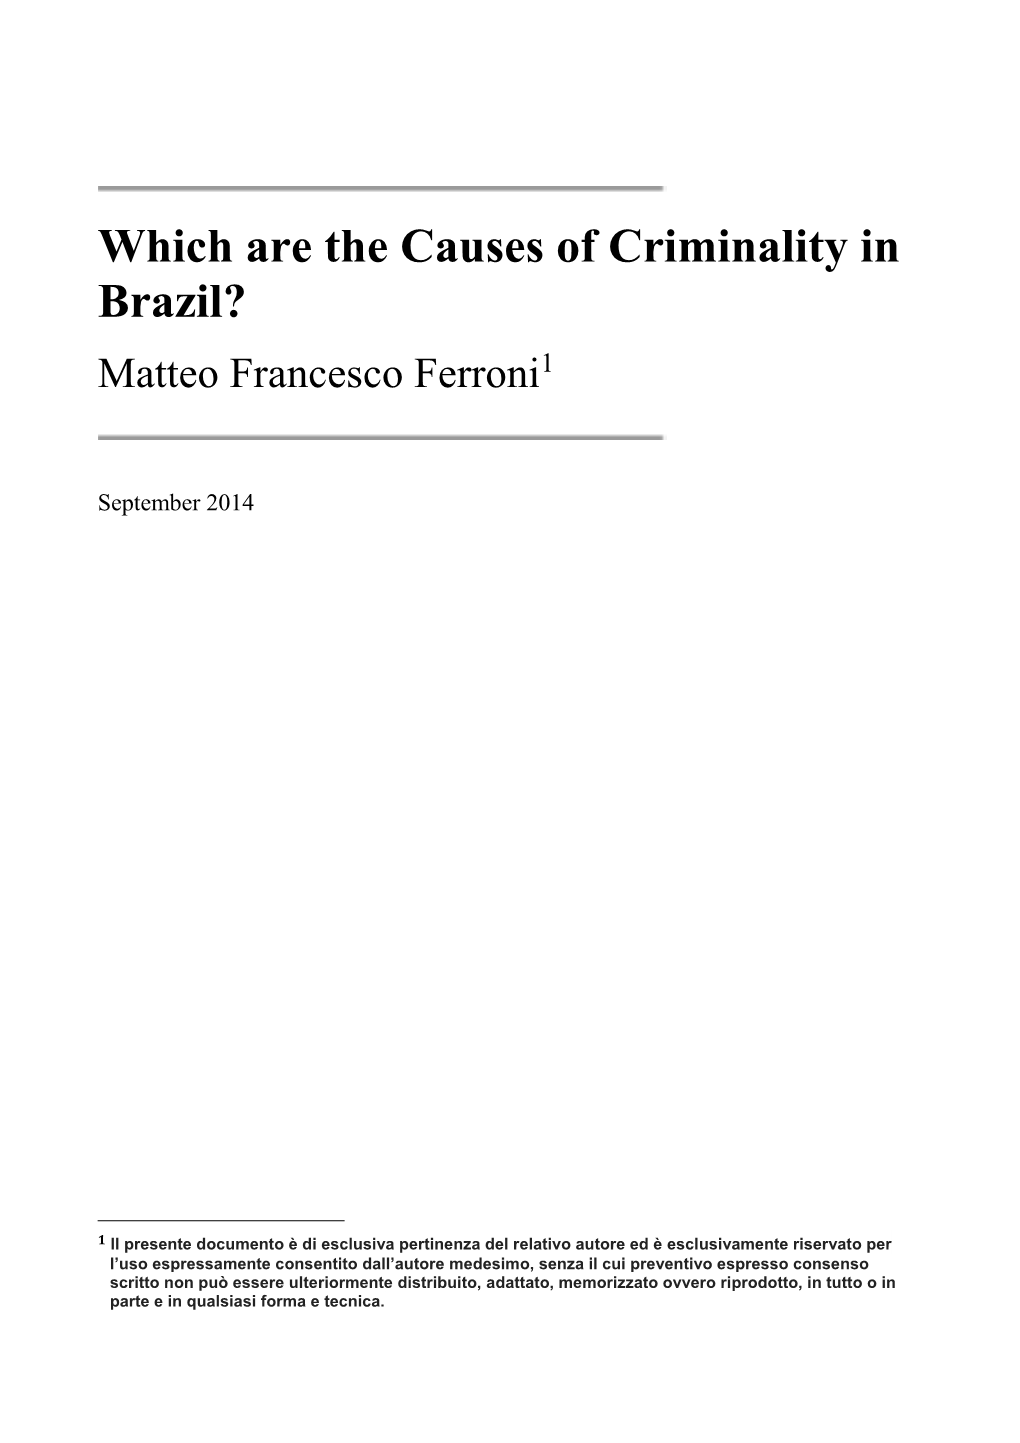 Which Are the Causes of Criminality in Brazil? Matteo Francesco Ferroni1